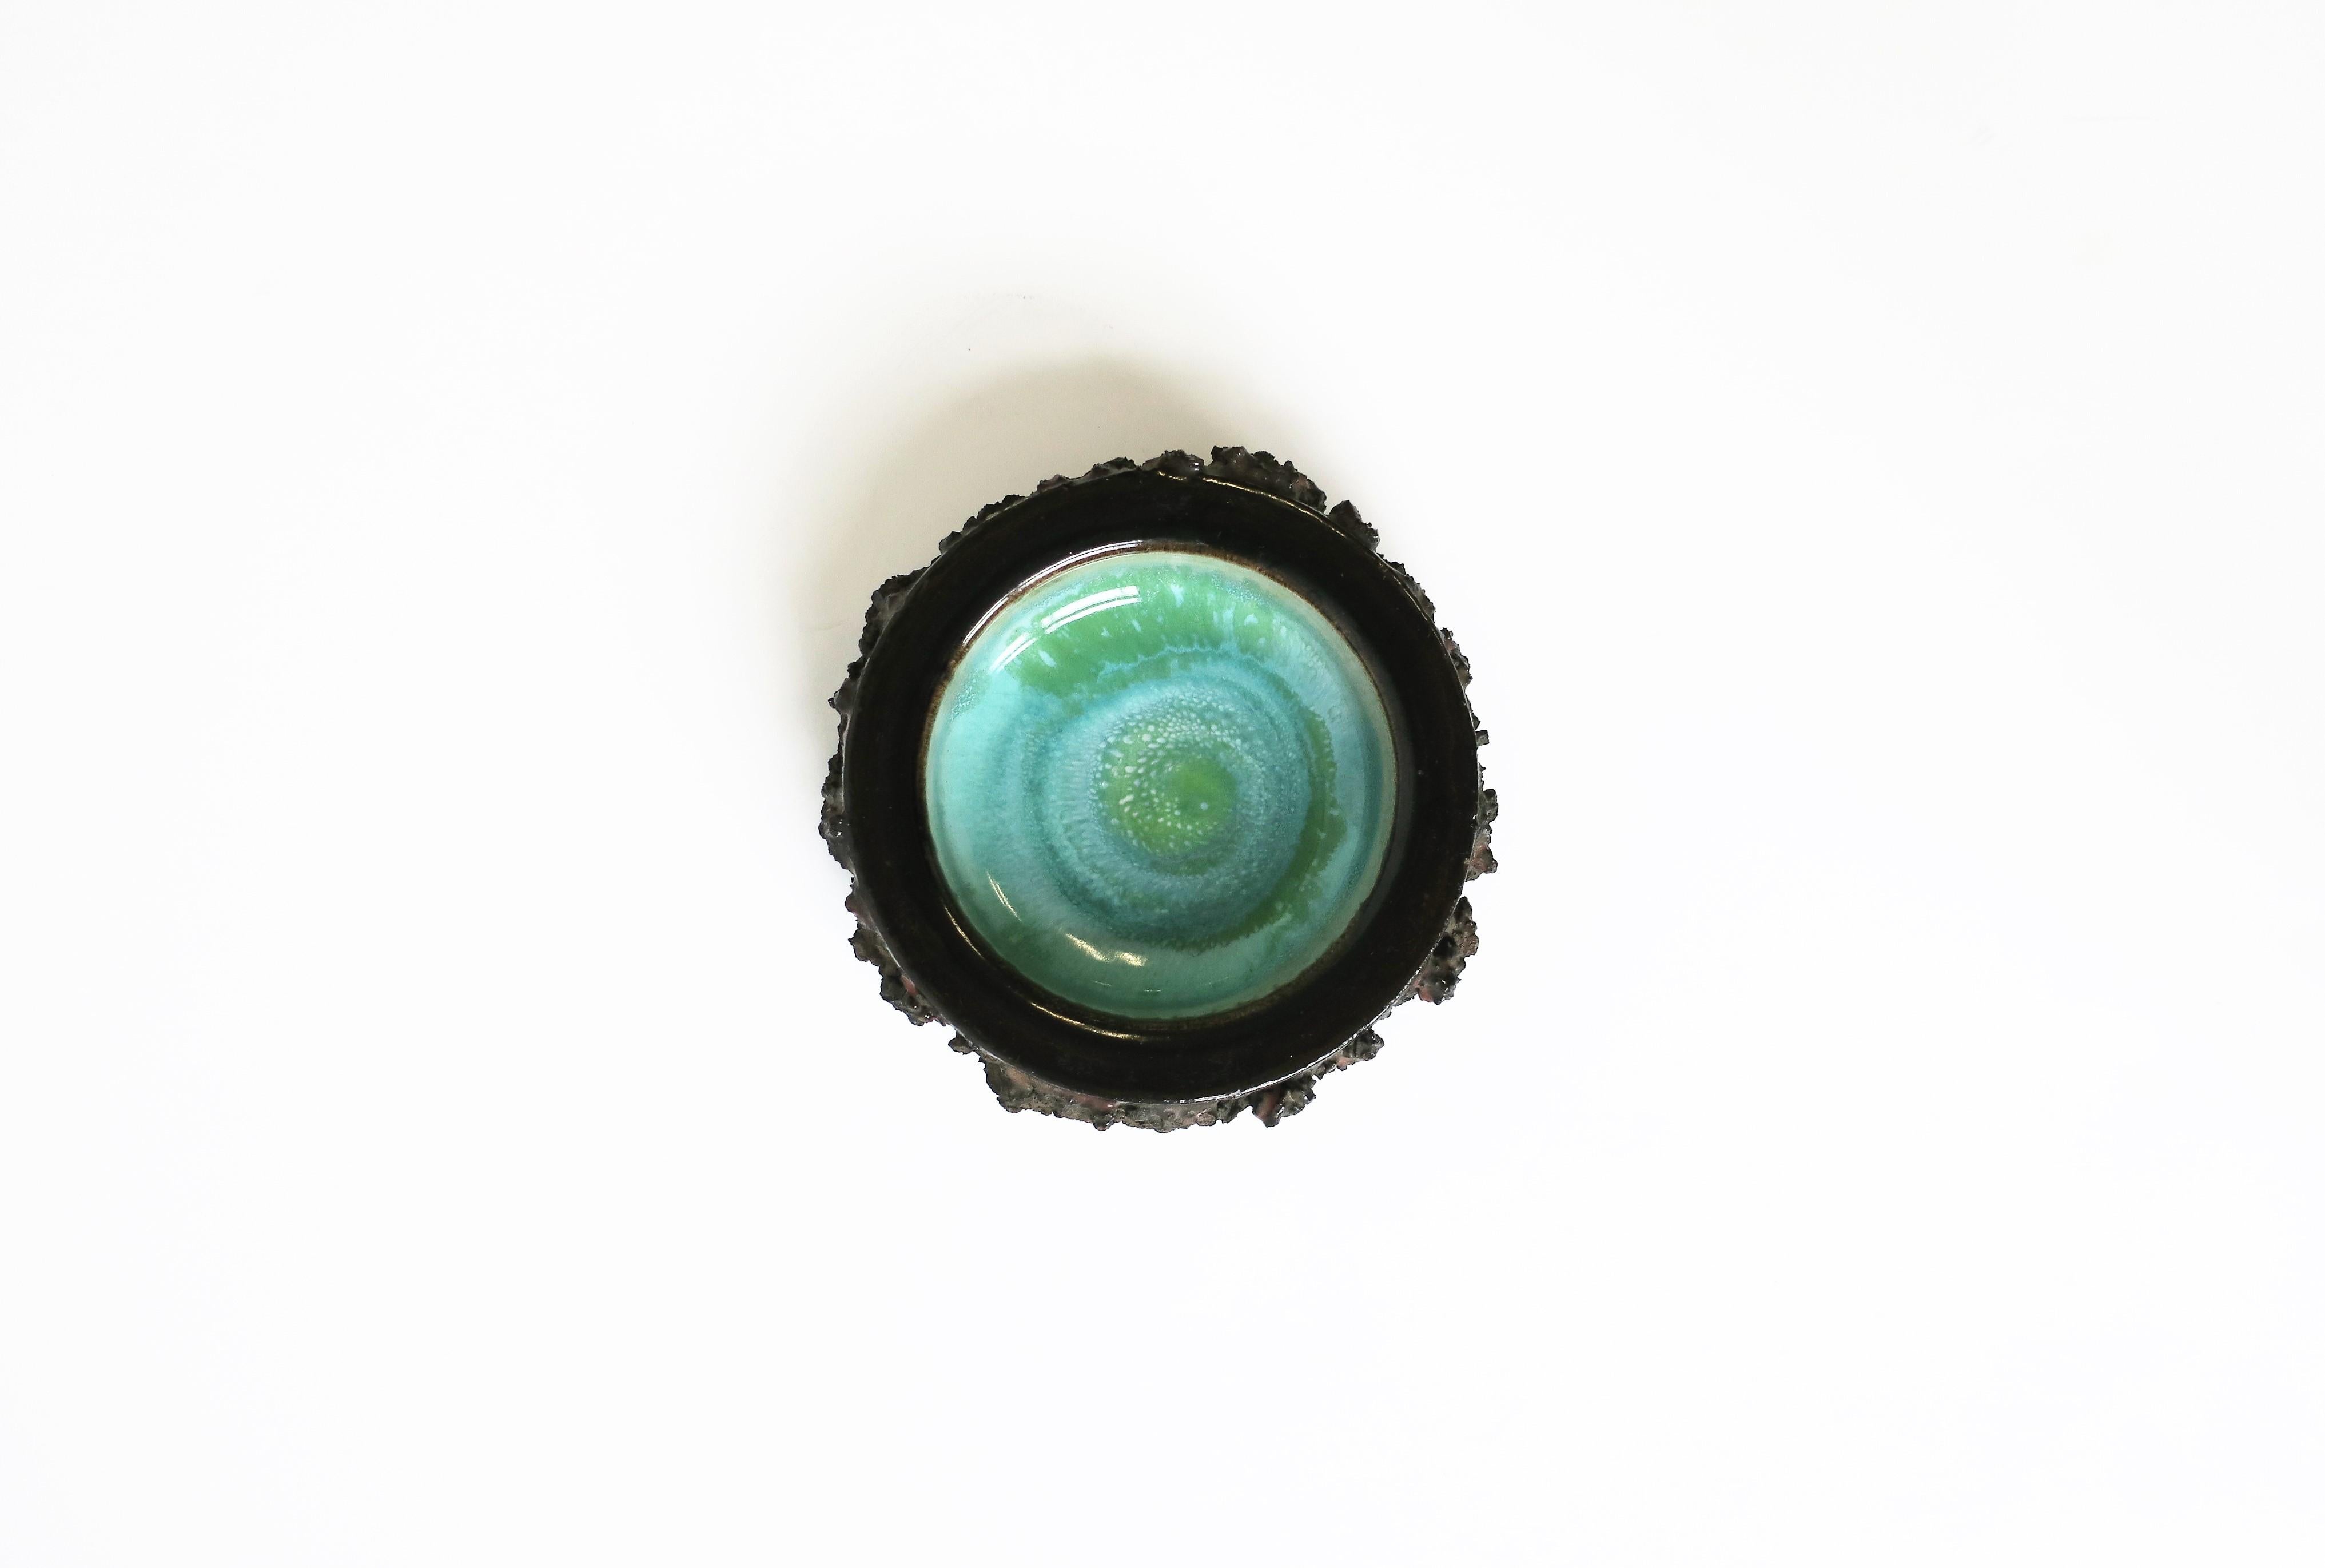 A very beautiful and rare Icelandic blue green pottery dish, circa 20th century, Iceland. Bowl has a dark blue and brown brutalist exterior and a beautiful blue-green interior. A great dish/bowl or as a catch-all or vide-poche for jewelry or other